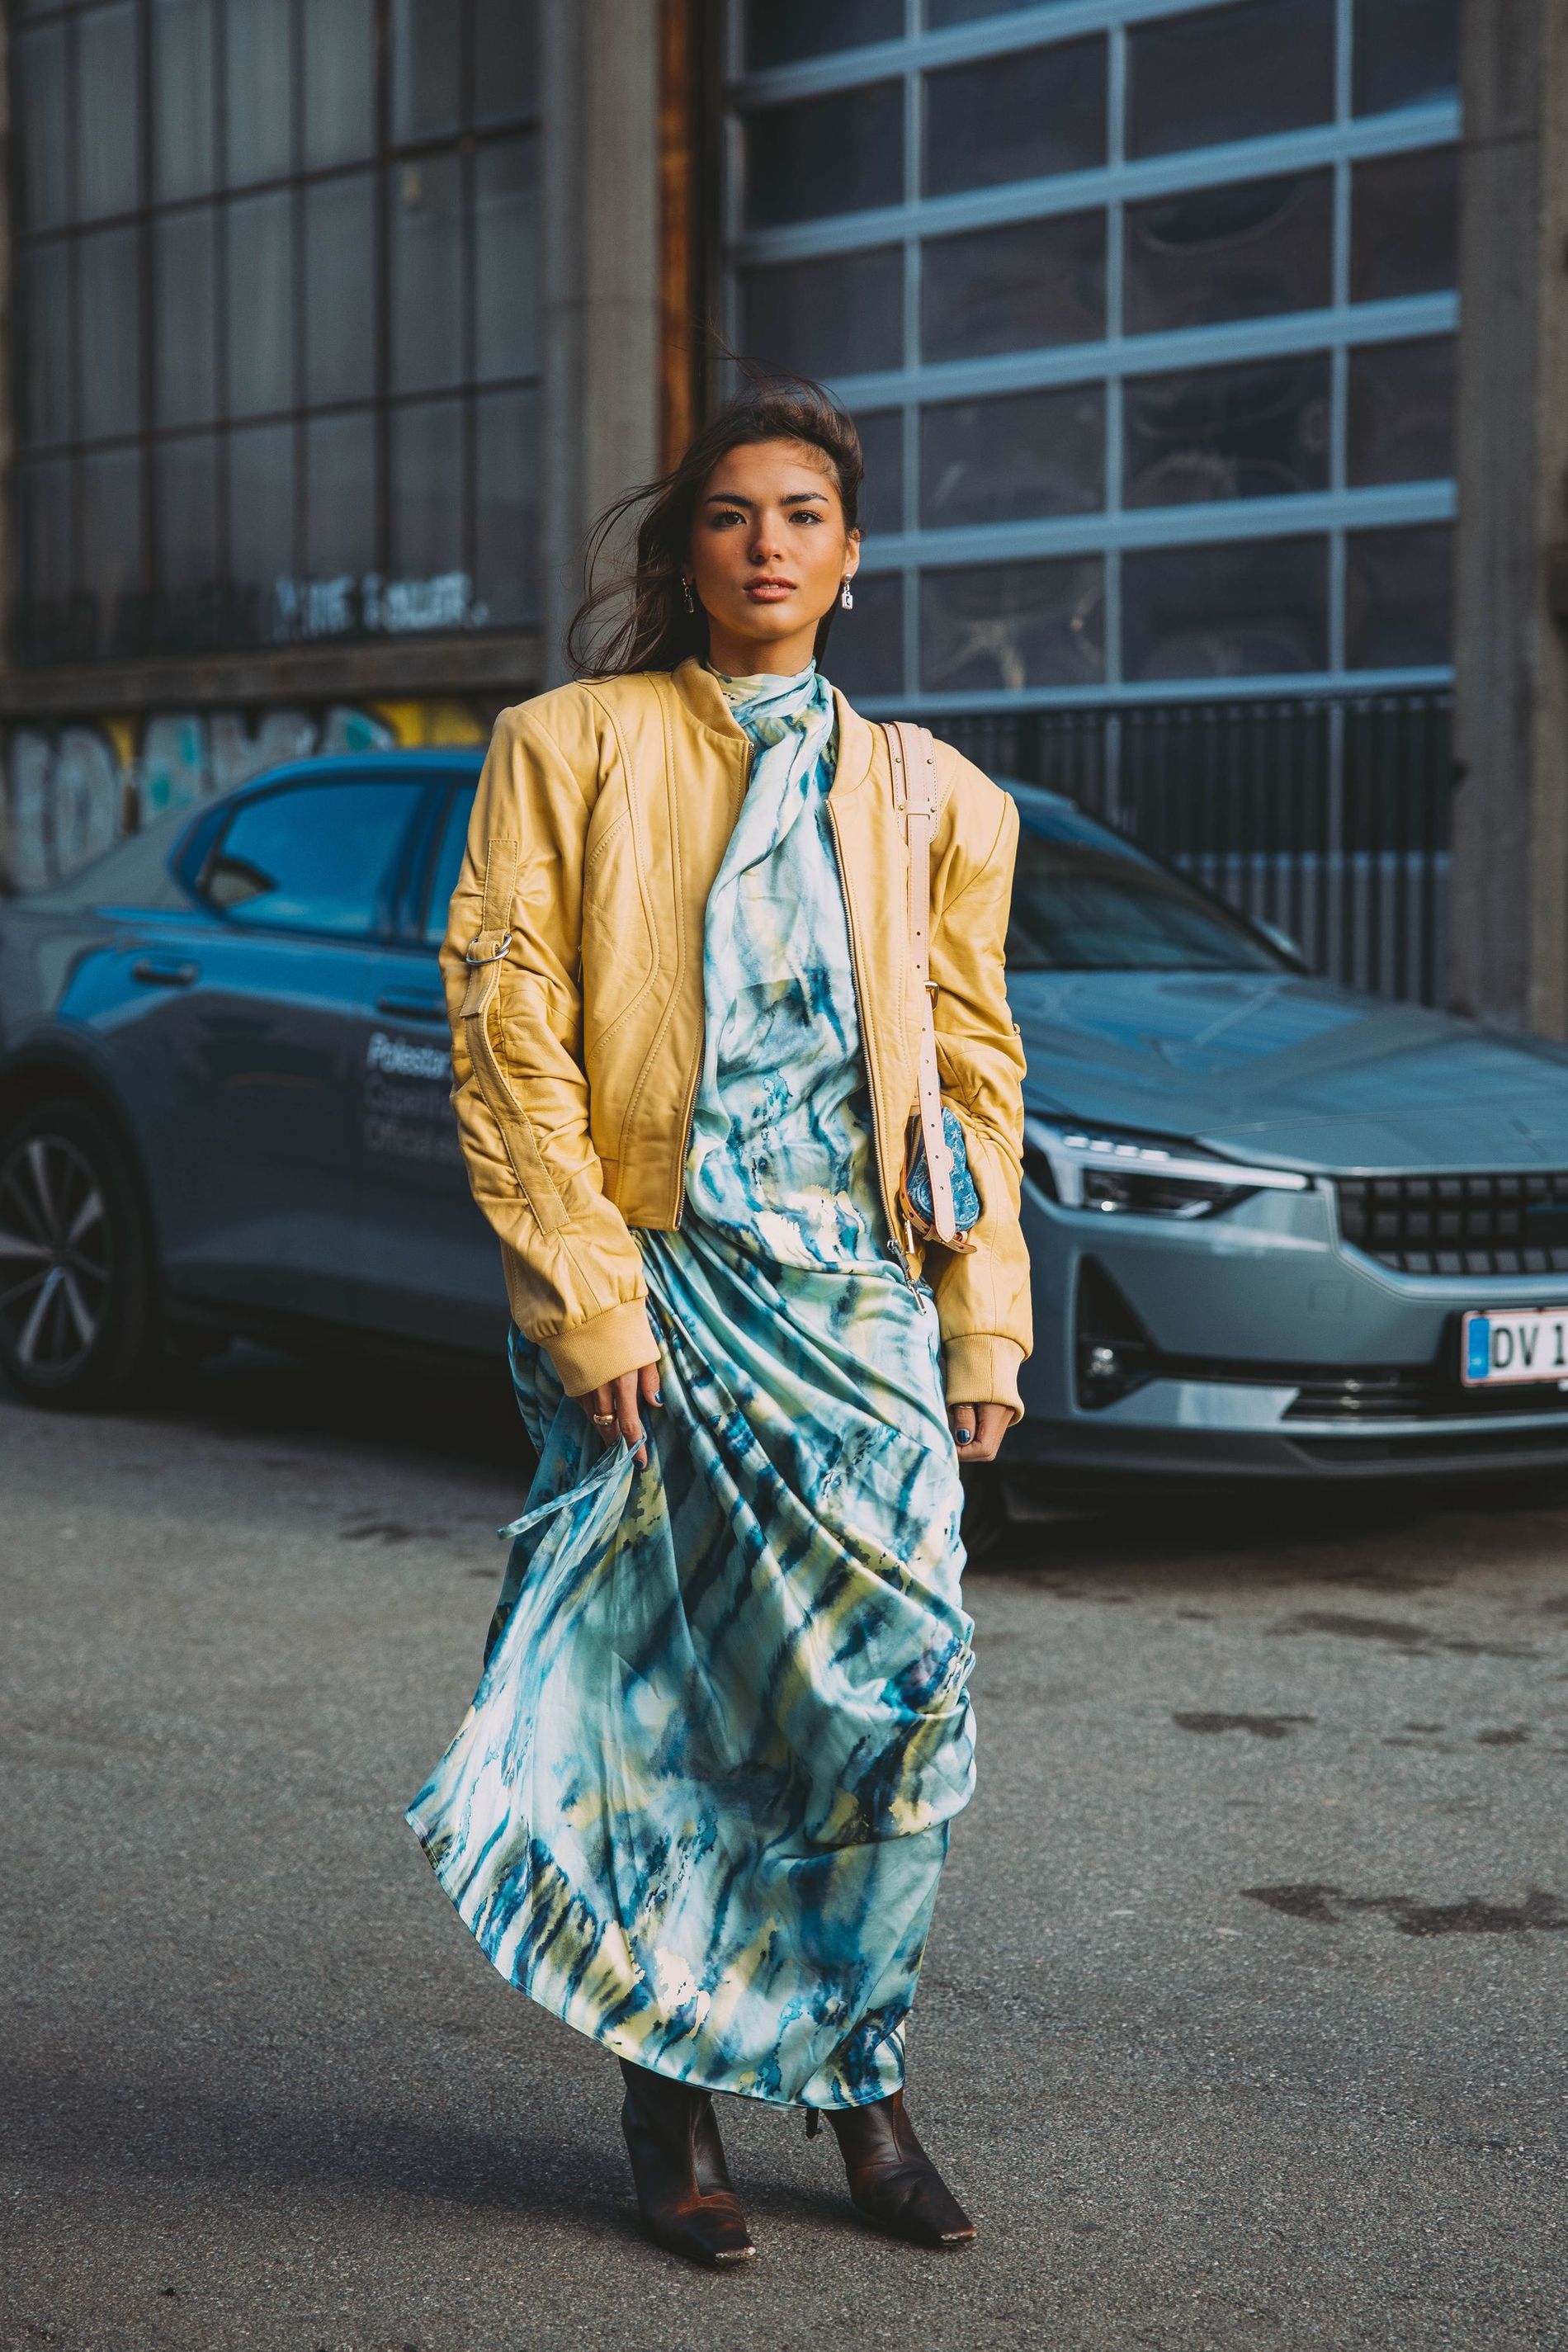 A guest wears a butter yellow bomber jacket paired with a tie dye blue dress and brown boots